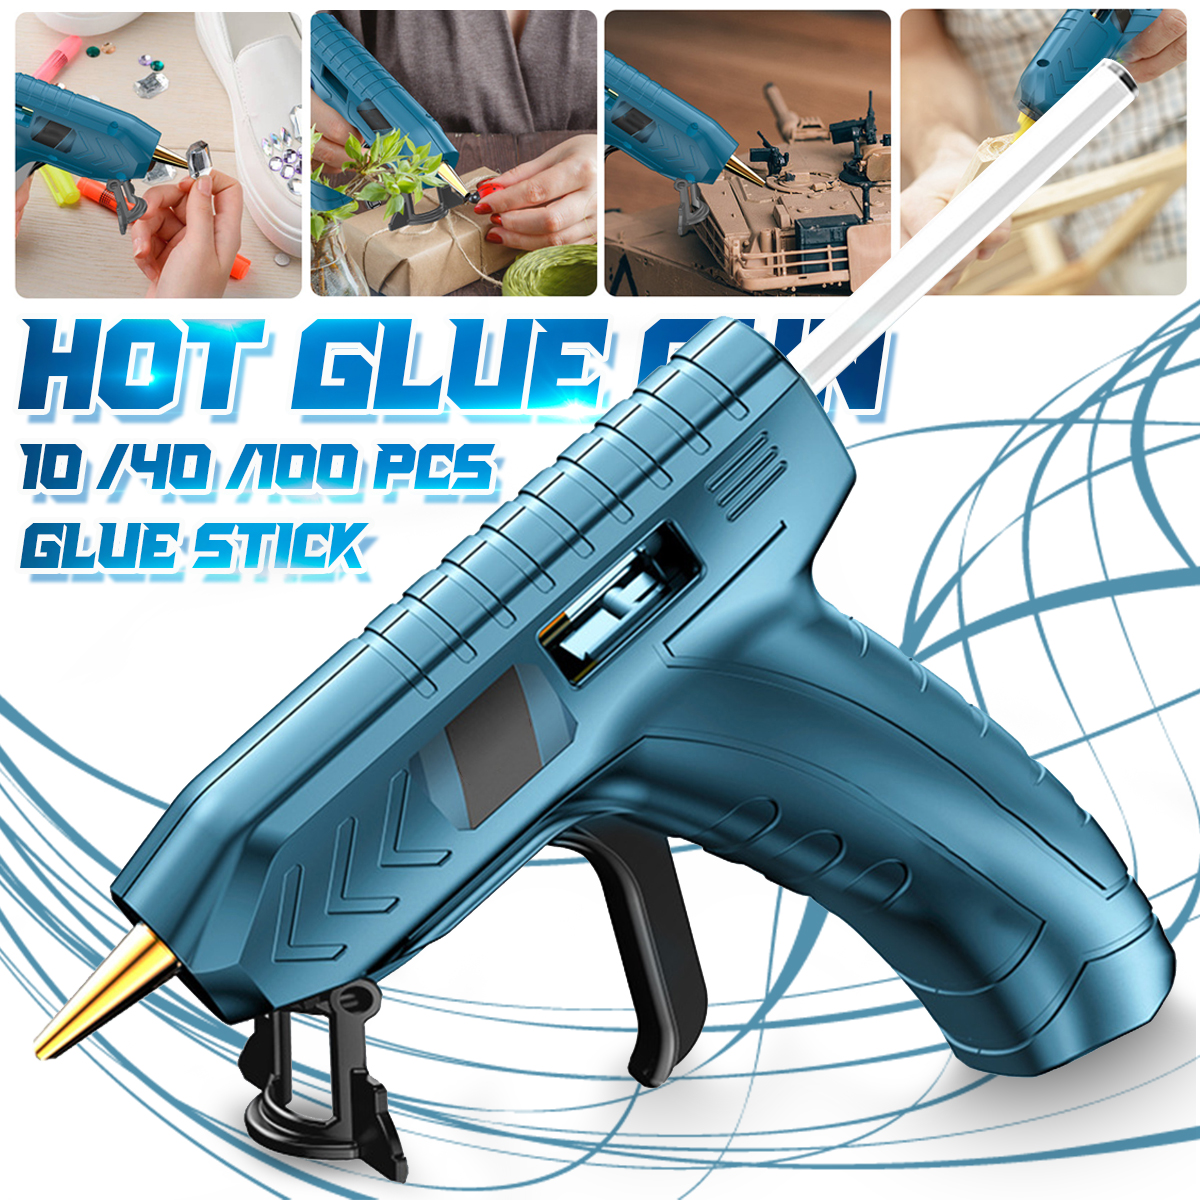 Find 1800mAh 40W Cordless DIY Hot Melt Glue Guns Hot Glue Guns with Sticks USB Rechargeable Melting Glue Gun Kit for Kids DIY Arts Crafts Projects for Sale on Gipsybee.com with cryptocurrencies